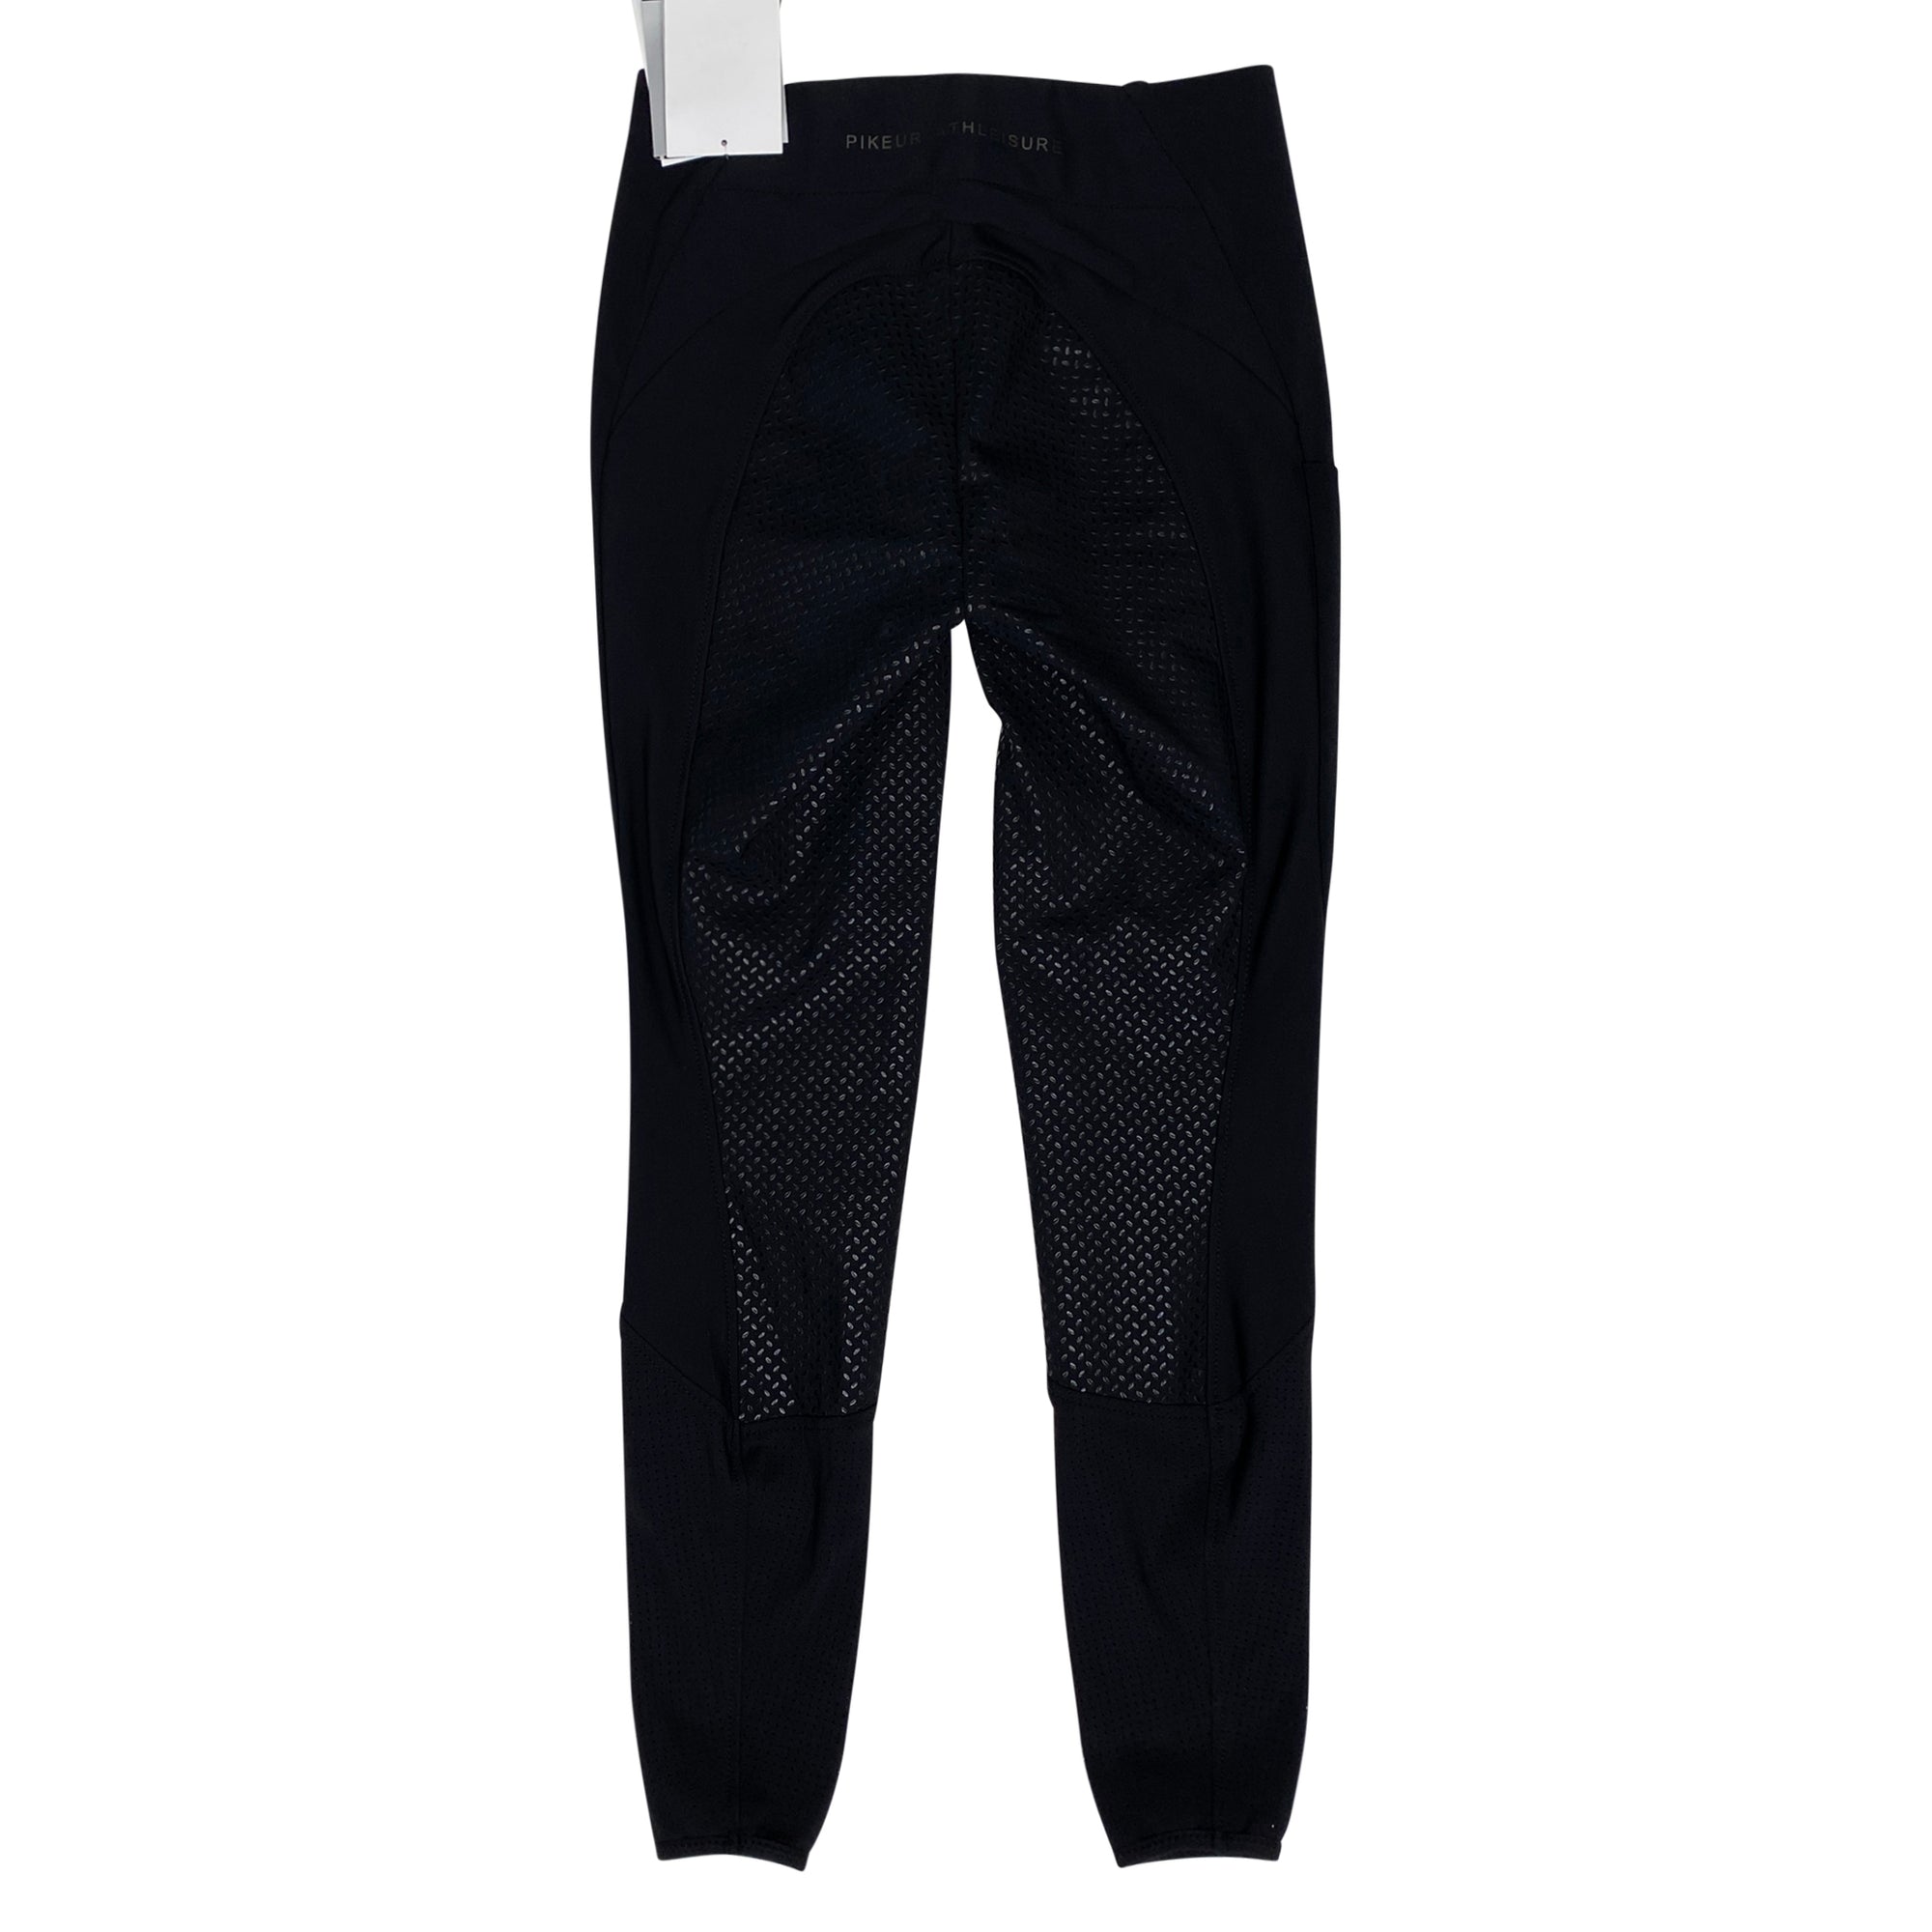 Pikeur 'Orell' Full Seat Breeches in Black